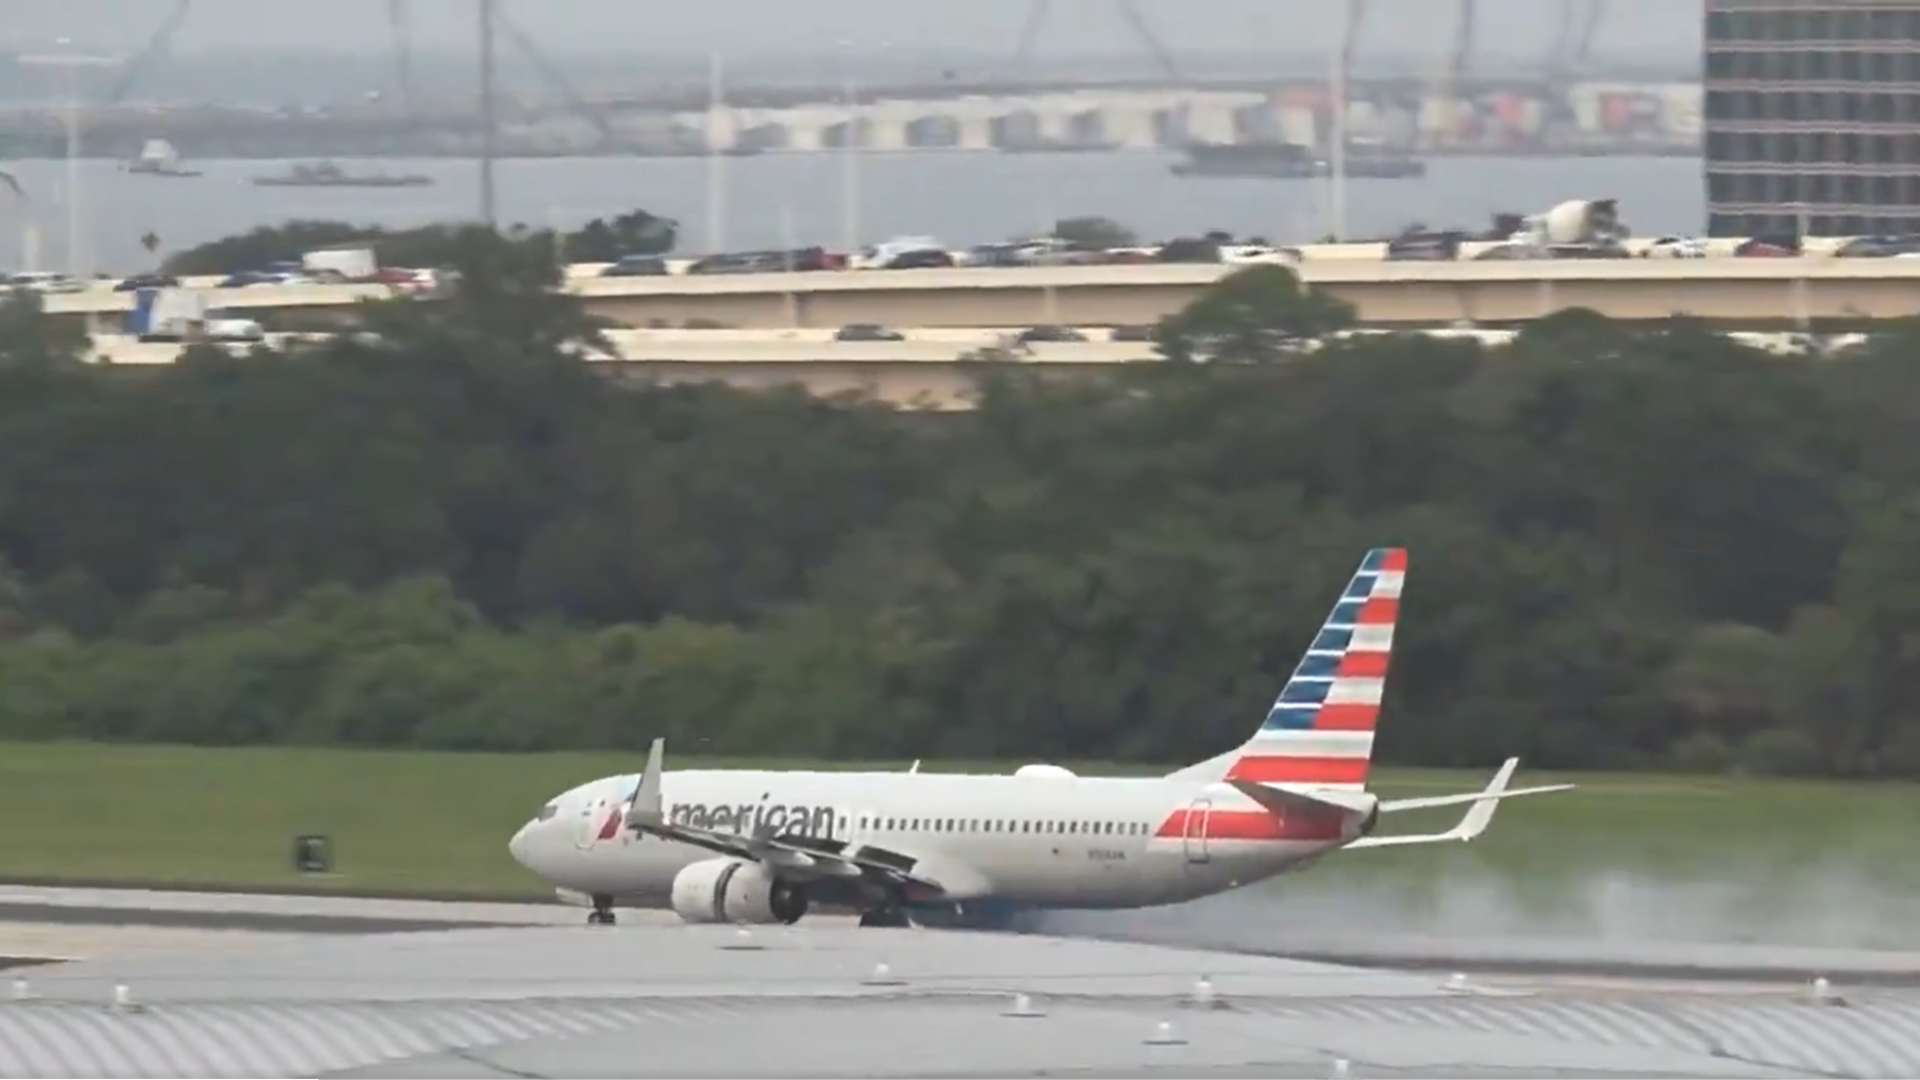 Watch | American Airlines Flight’s Dramatic Tire Blowout